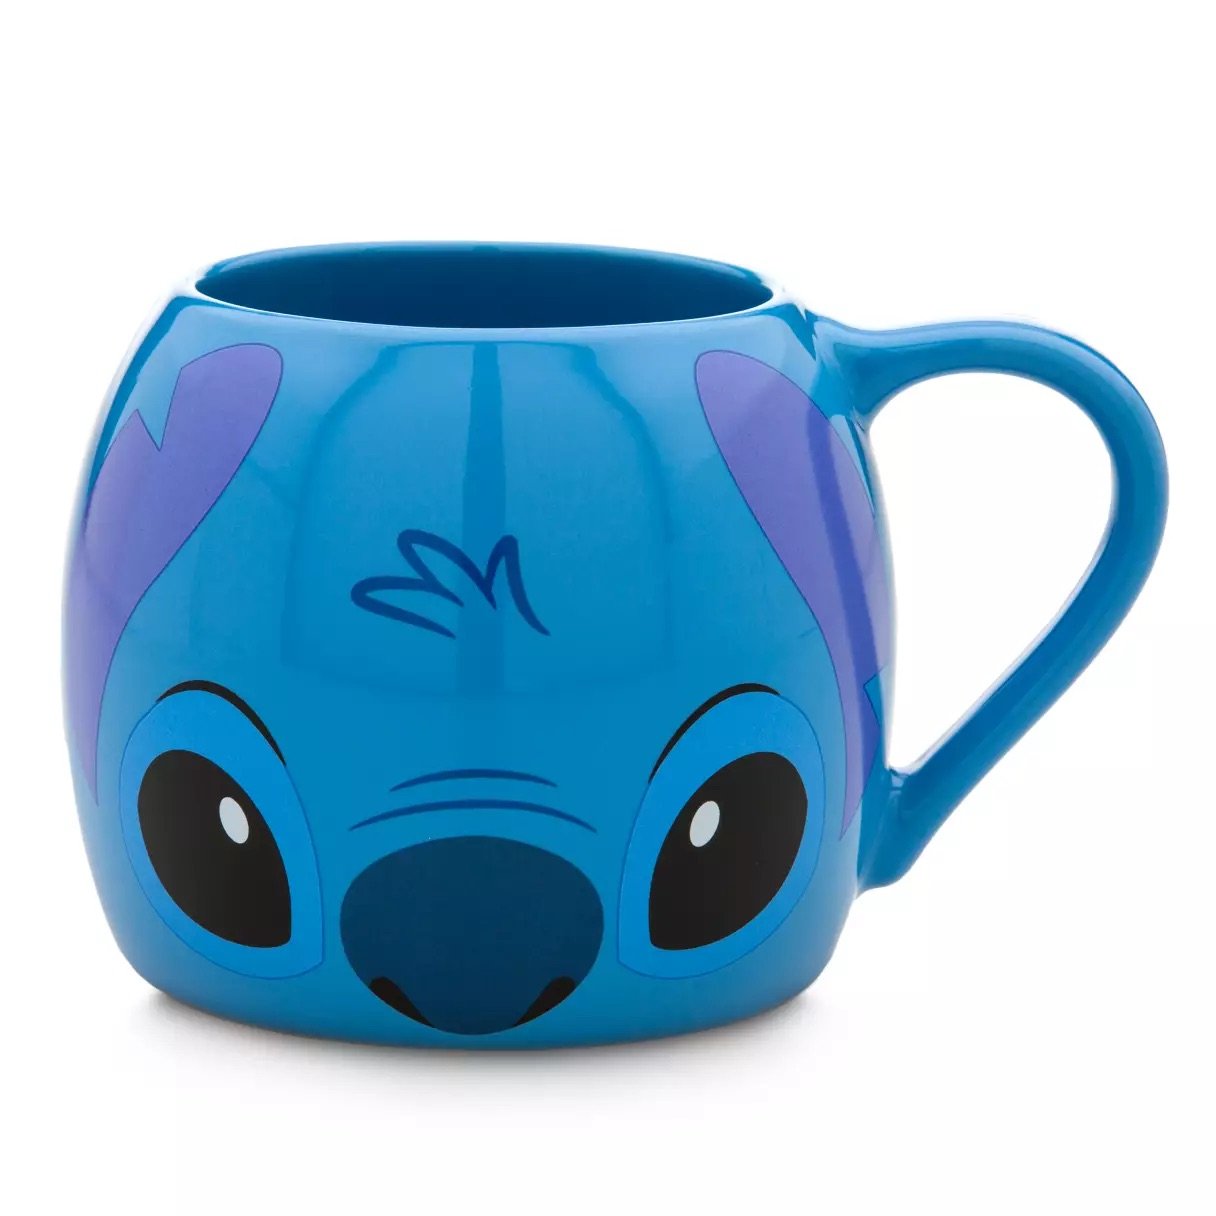 The Summer Stitch Collection on shopDisney — EXTRA MAGIC MINUTES